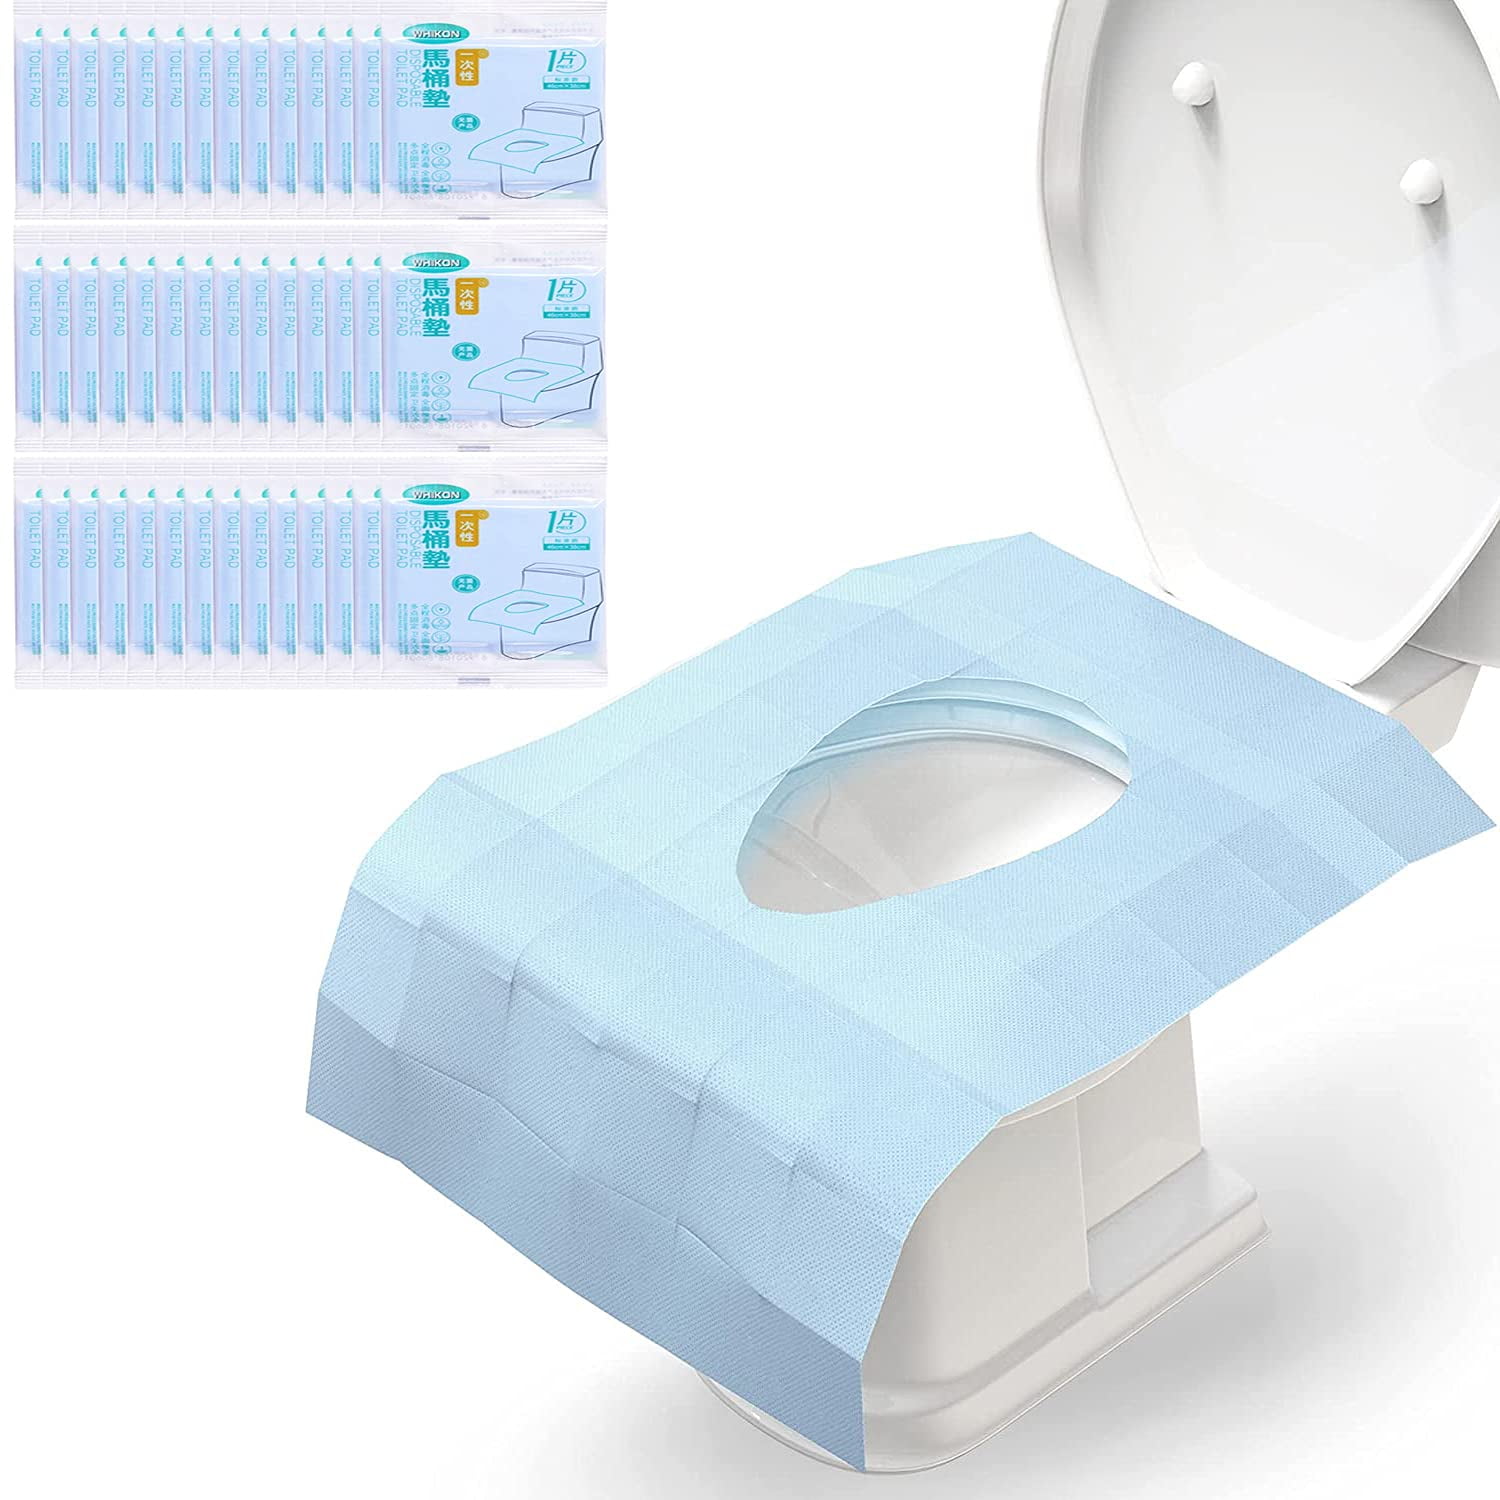 Details about   Pocket Size Travel Wrapped Antibacterial Waterproof Disposable Toilet Seat Cover 